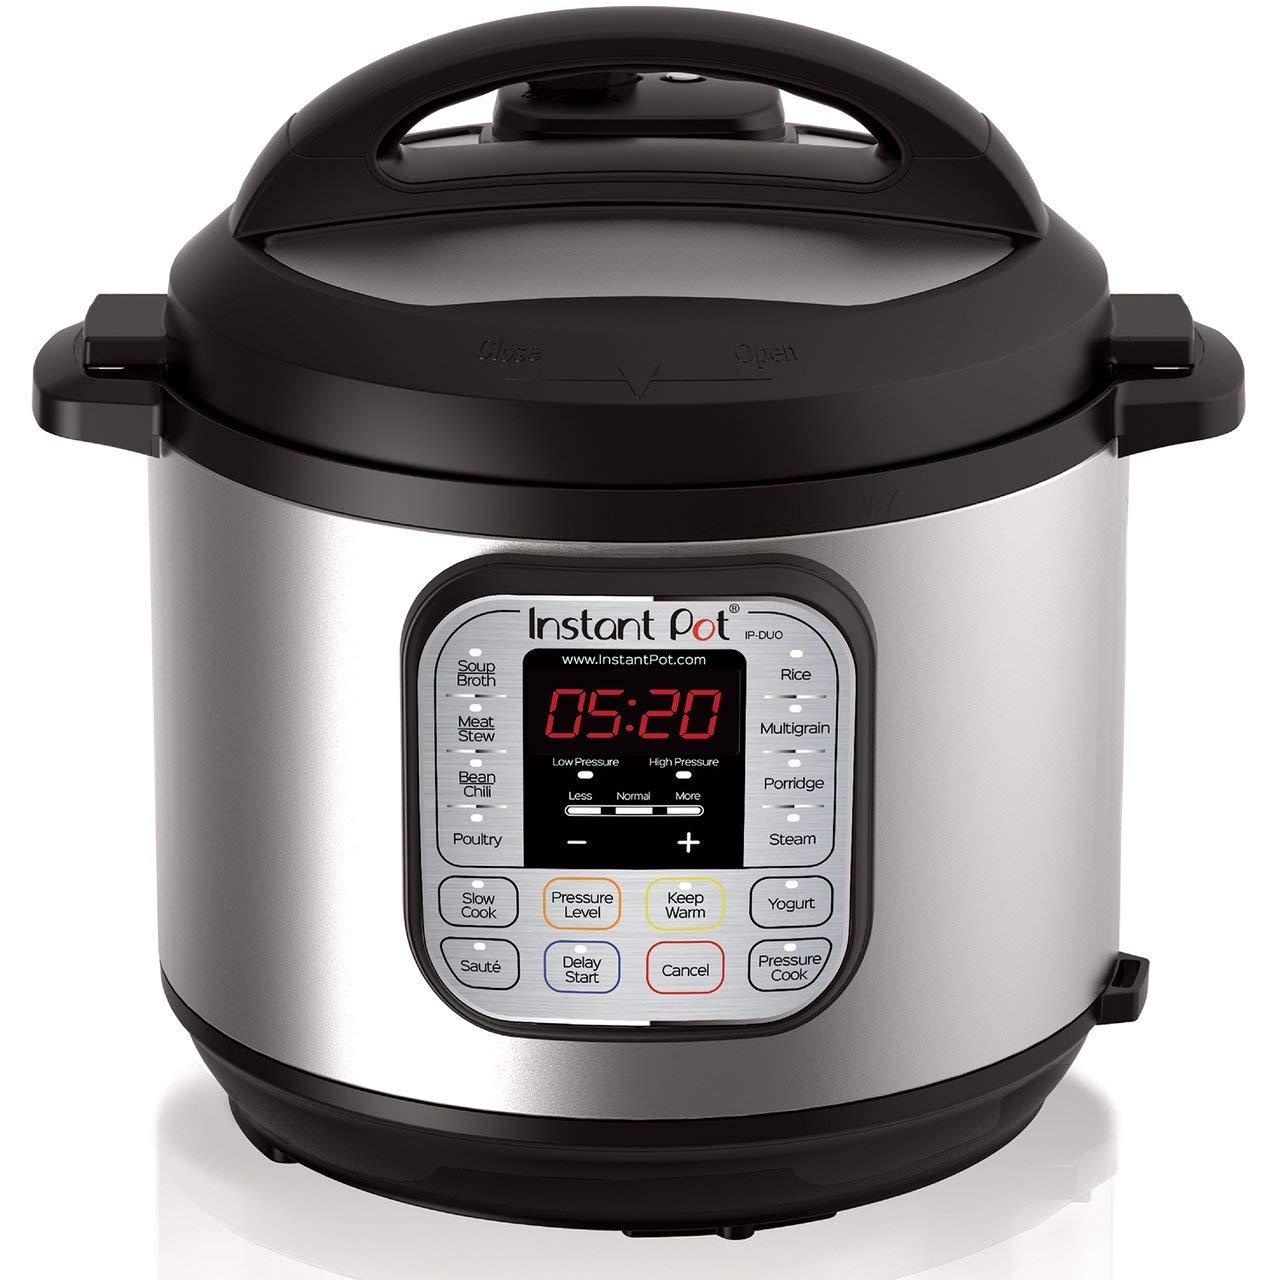 Instant Pot makes cooking easier when you have a chronic illness or disability.